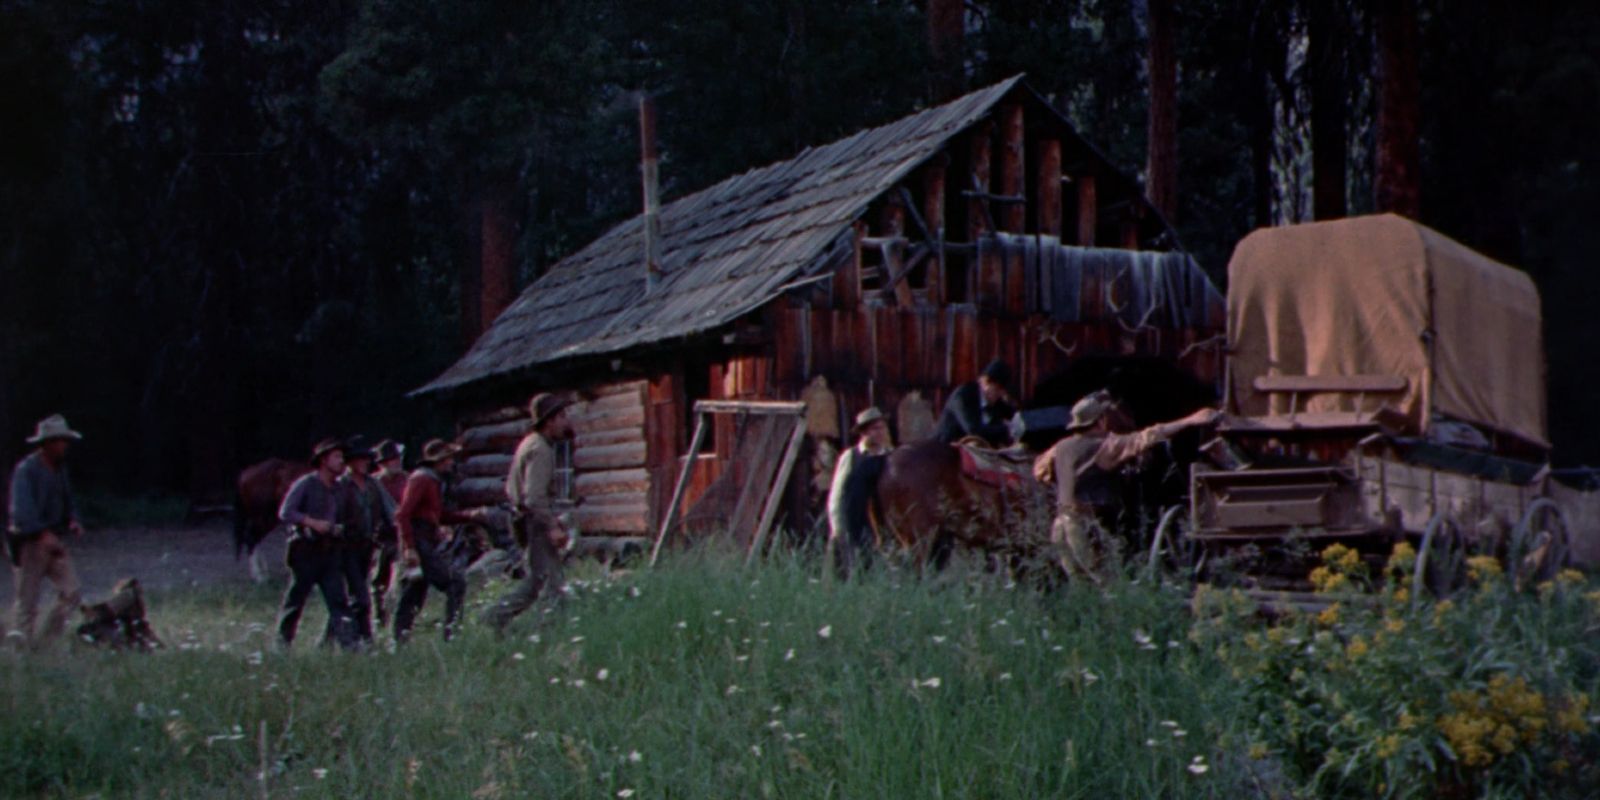 The Hanging Tree shows a log cabin with a wagon outside.